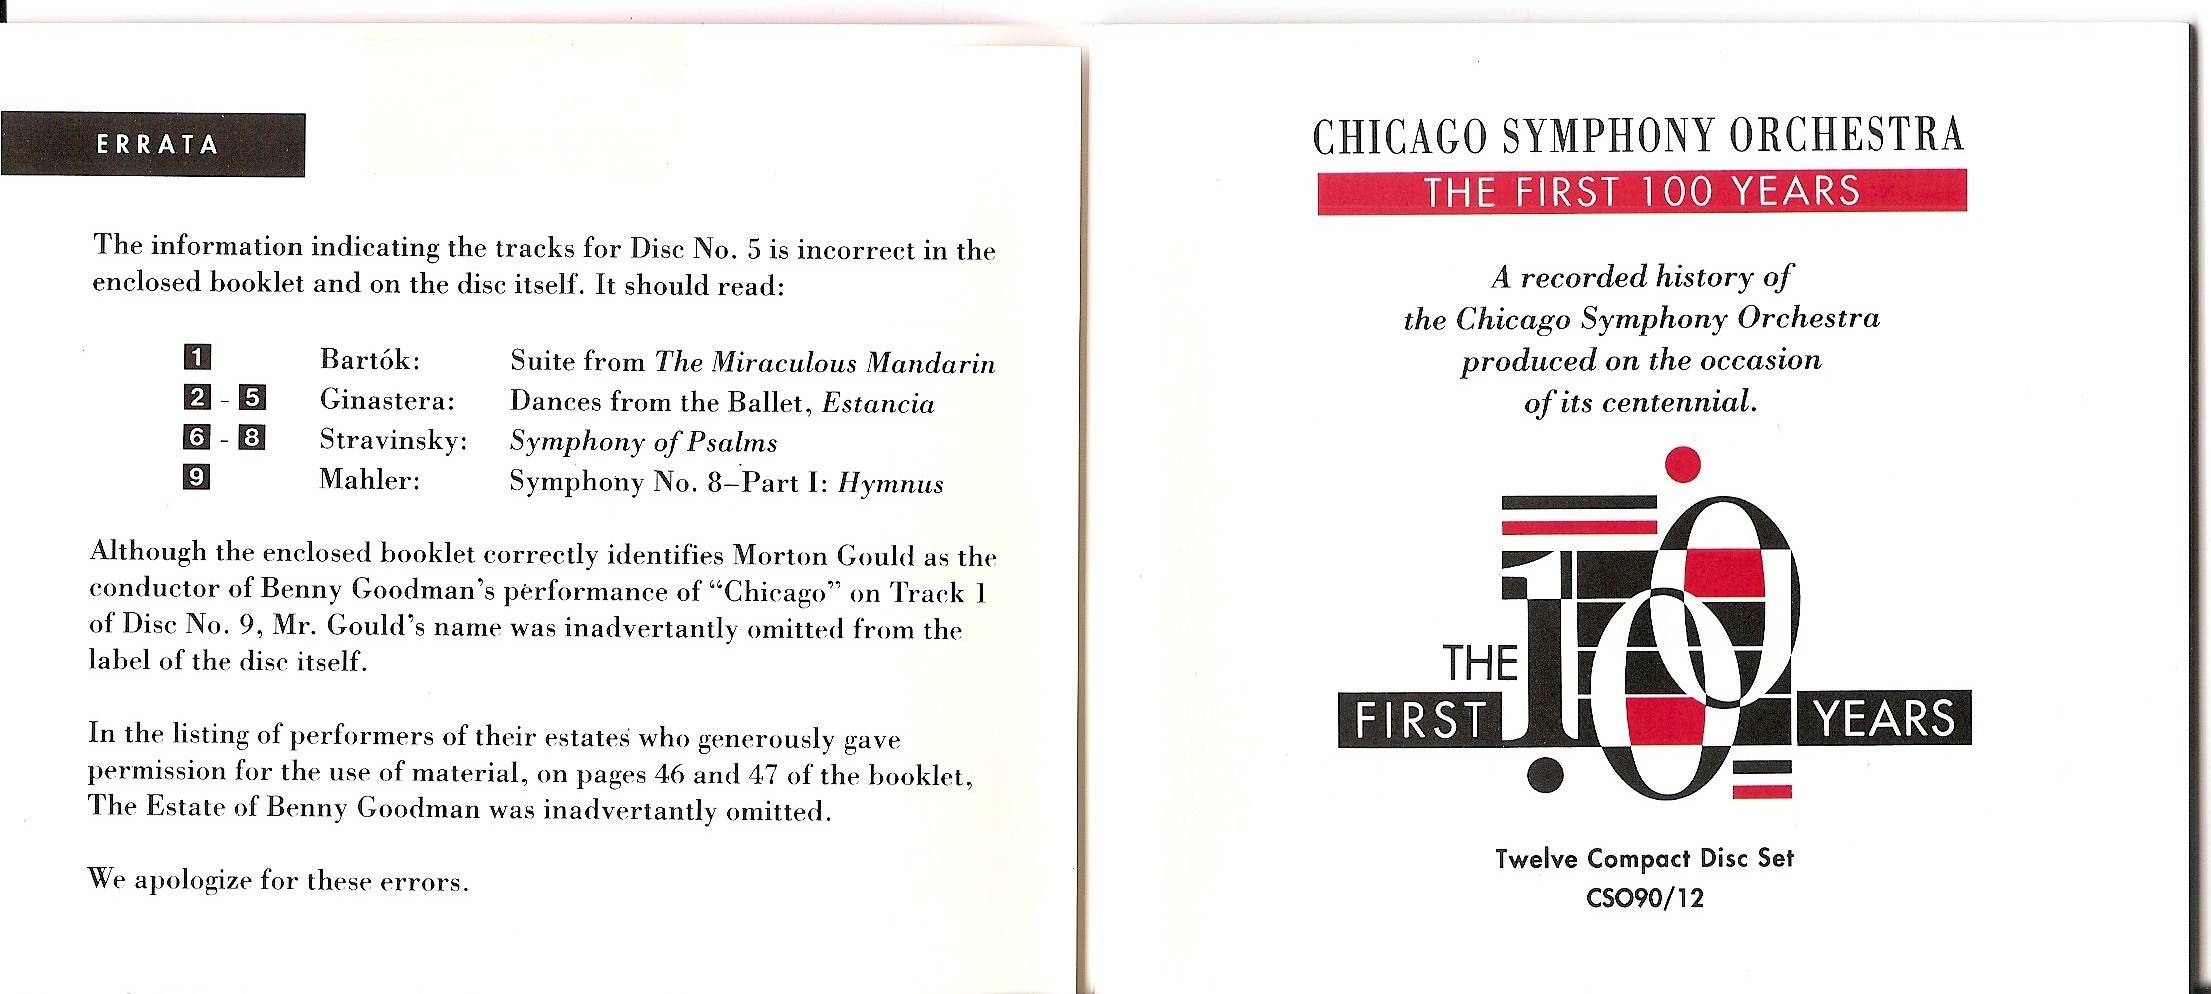 Chicago Symphony Orchestra - From The Archives: The First 100 Years, 12-CD set (1991) (page 3 of  7)